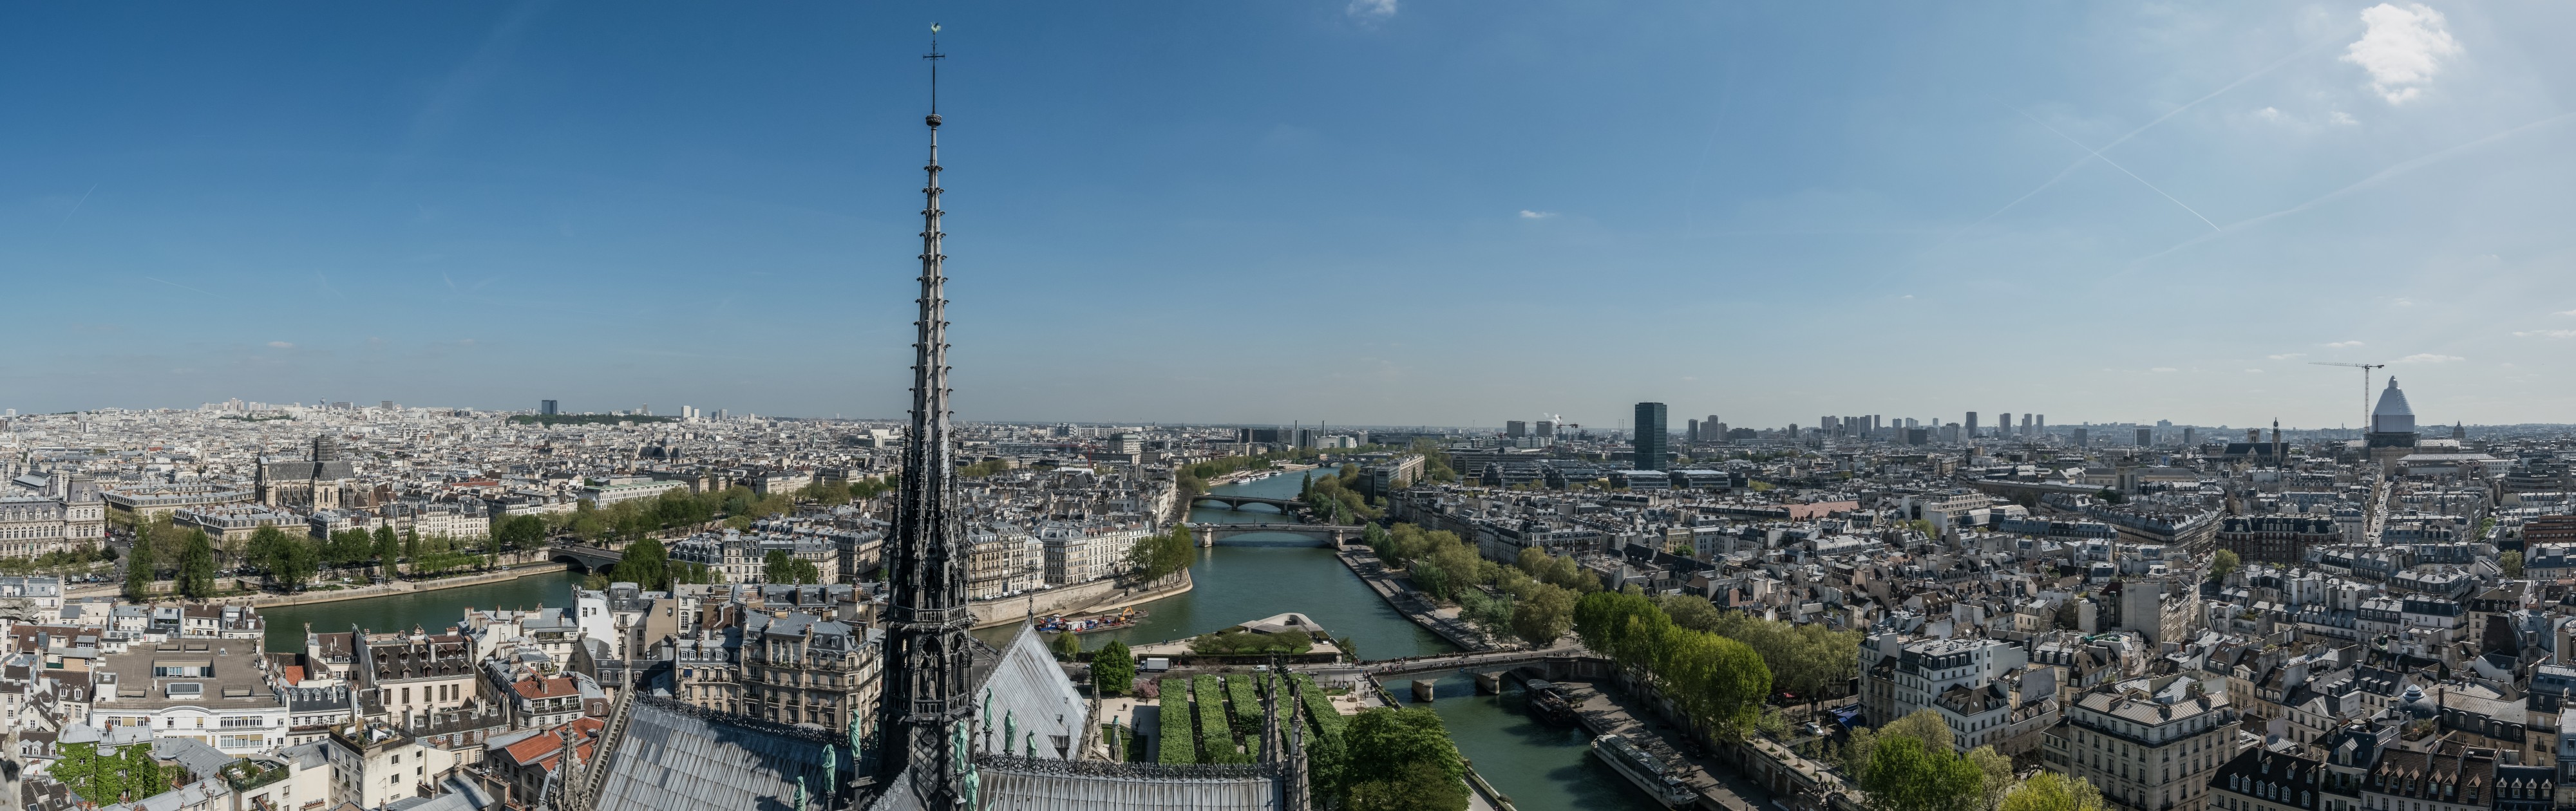 View of East Central Paris as seen from the Towers of Notre-Dame 20140409 1